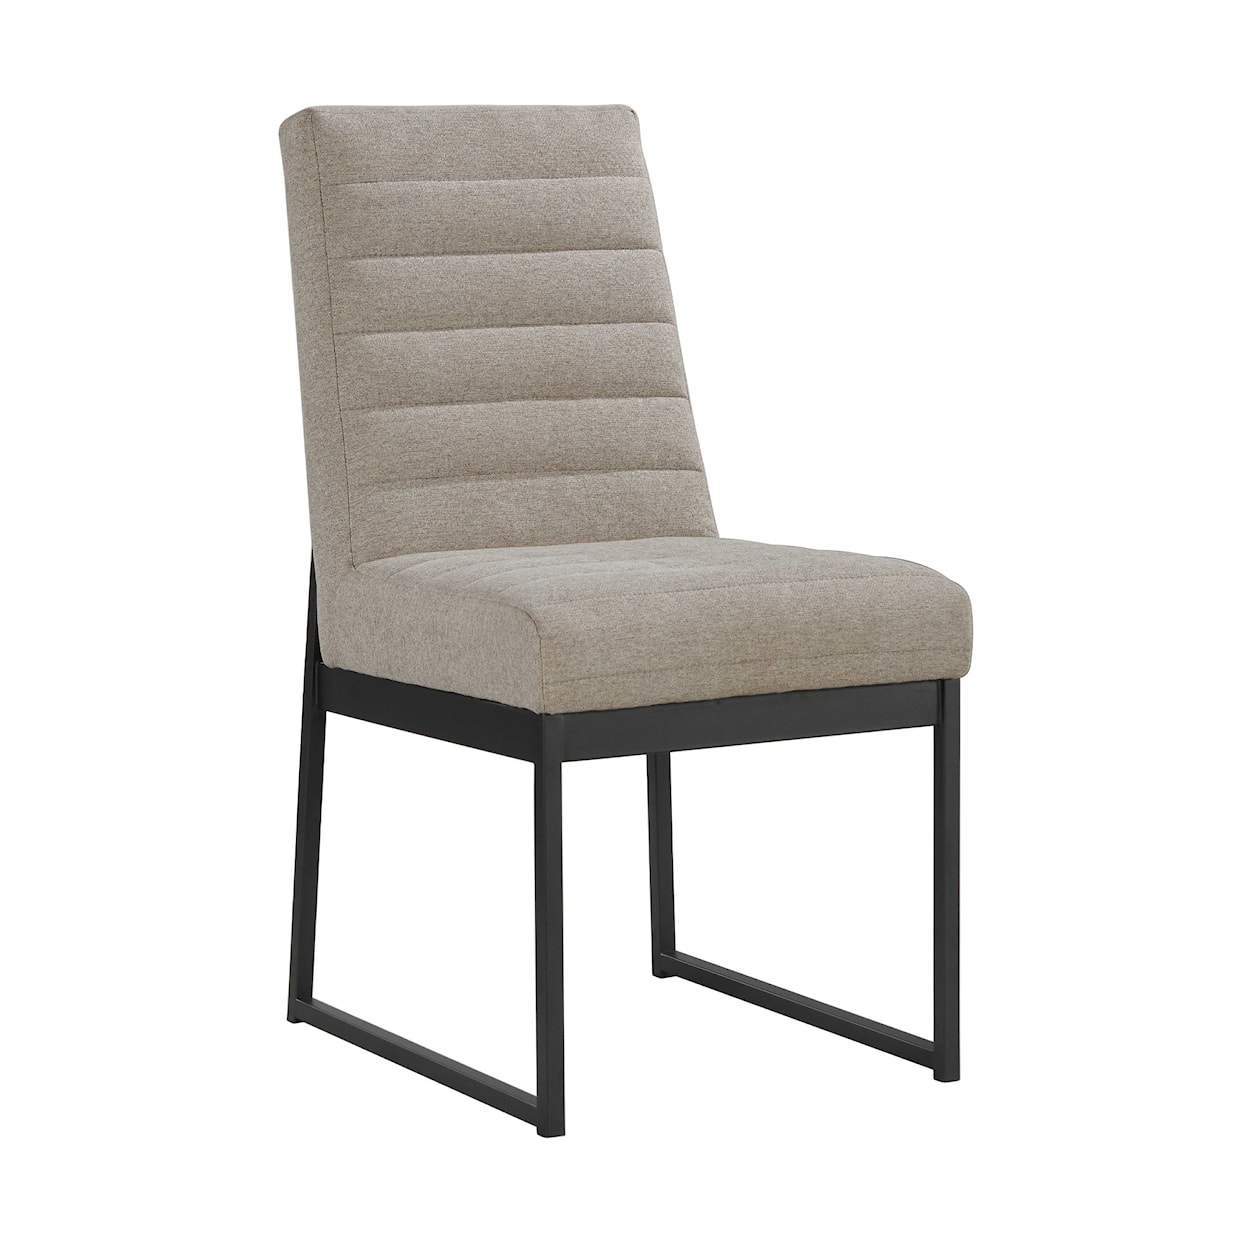 Intercon Eden 6-Piece Table and Chair Set